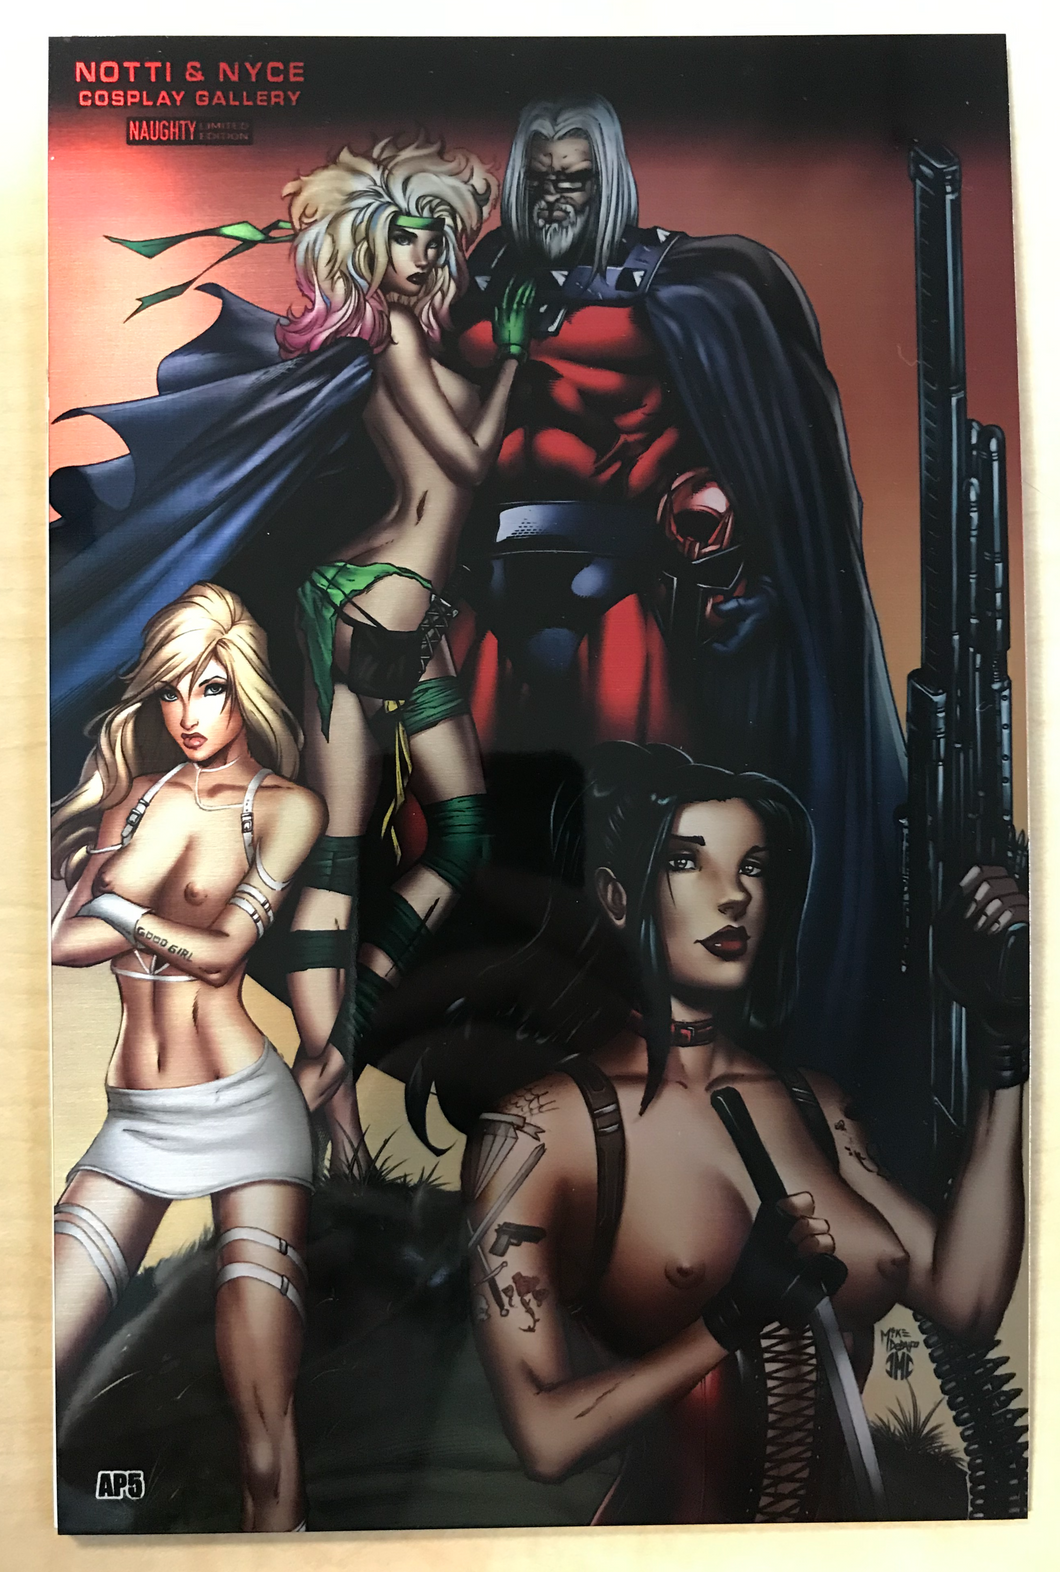 Notti & Nyce: Cosplay Gallery #1 Uncanny X-Men #274 Jim Lee Homage Naughty METAL Variant Cover by Marat Mychaels Artist Proof AP Only 10 Copies Made Comics Elite Exclusive!!!